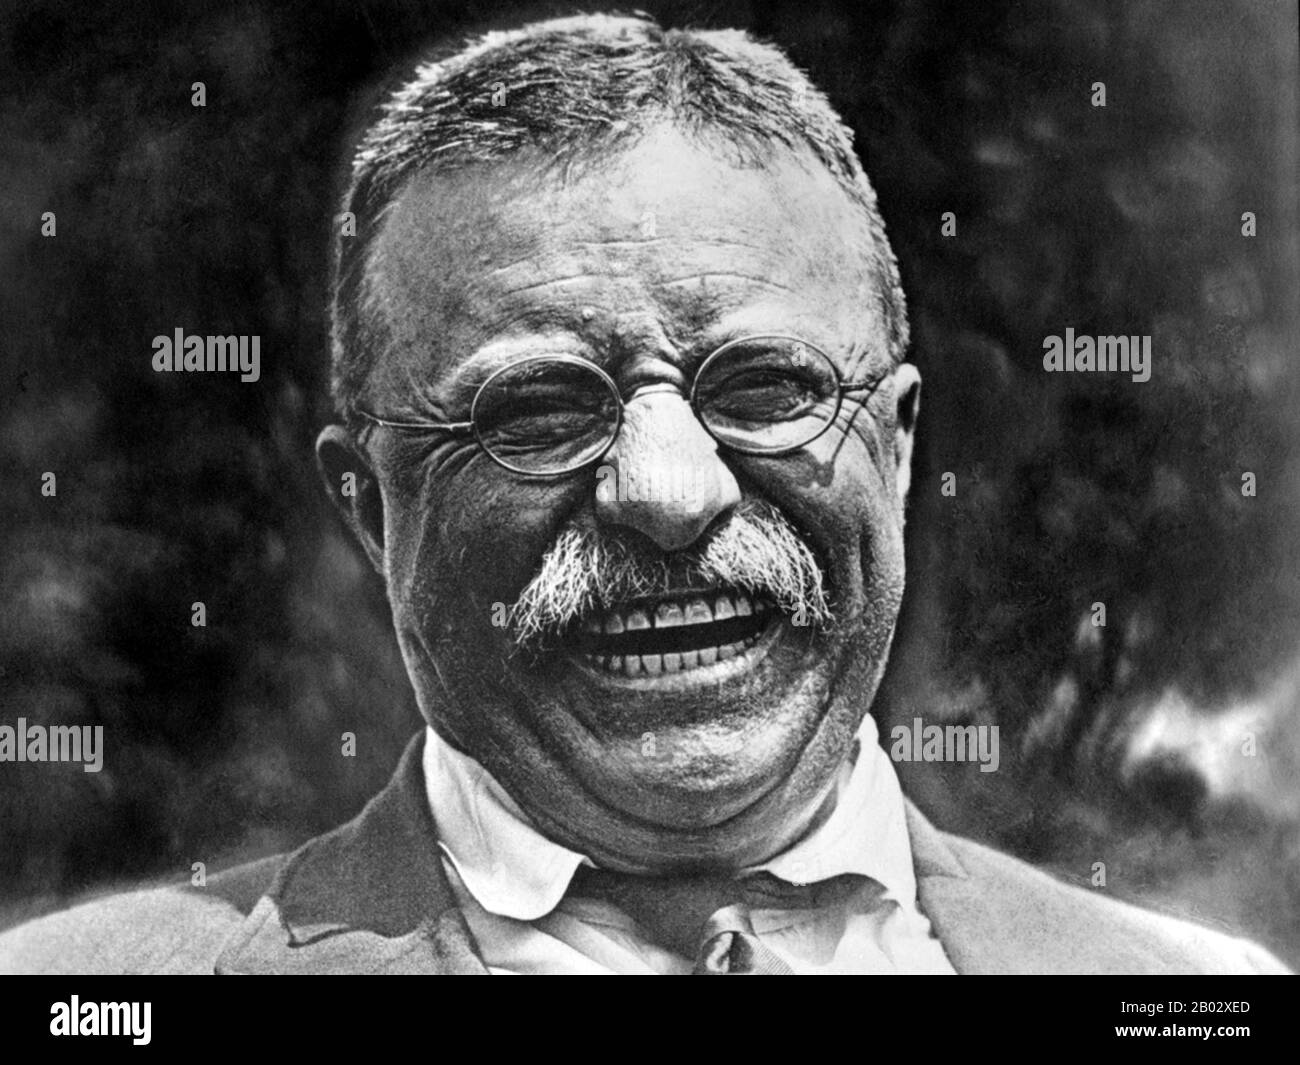 Theodore Roosevelt (October 27, 1858 – January 6, 1919), often referred to by his initials TR, was an American statesman, author, explorer, soldier, naturalist, and reformer who served as the 26th President of the United States. A leader of the Republican Party, he was a leading force of the Progressive Era.  He served as Assistant Secretary of the Navy under William McKinley, resigning after one year to serve with the First US Voluntary Cavalry Regiment or 'Rough Riders', gaining national fame for courage during the War in Cuba.  During World War I, he opposed President Wilson for keeping the Stock Photo